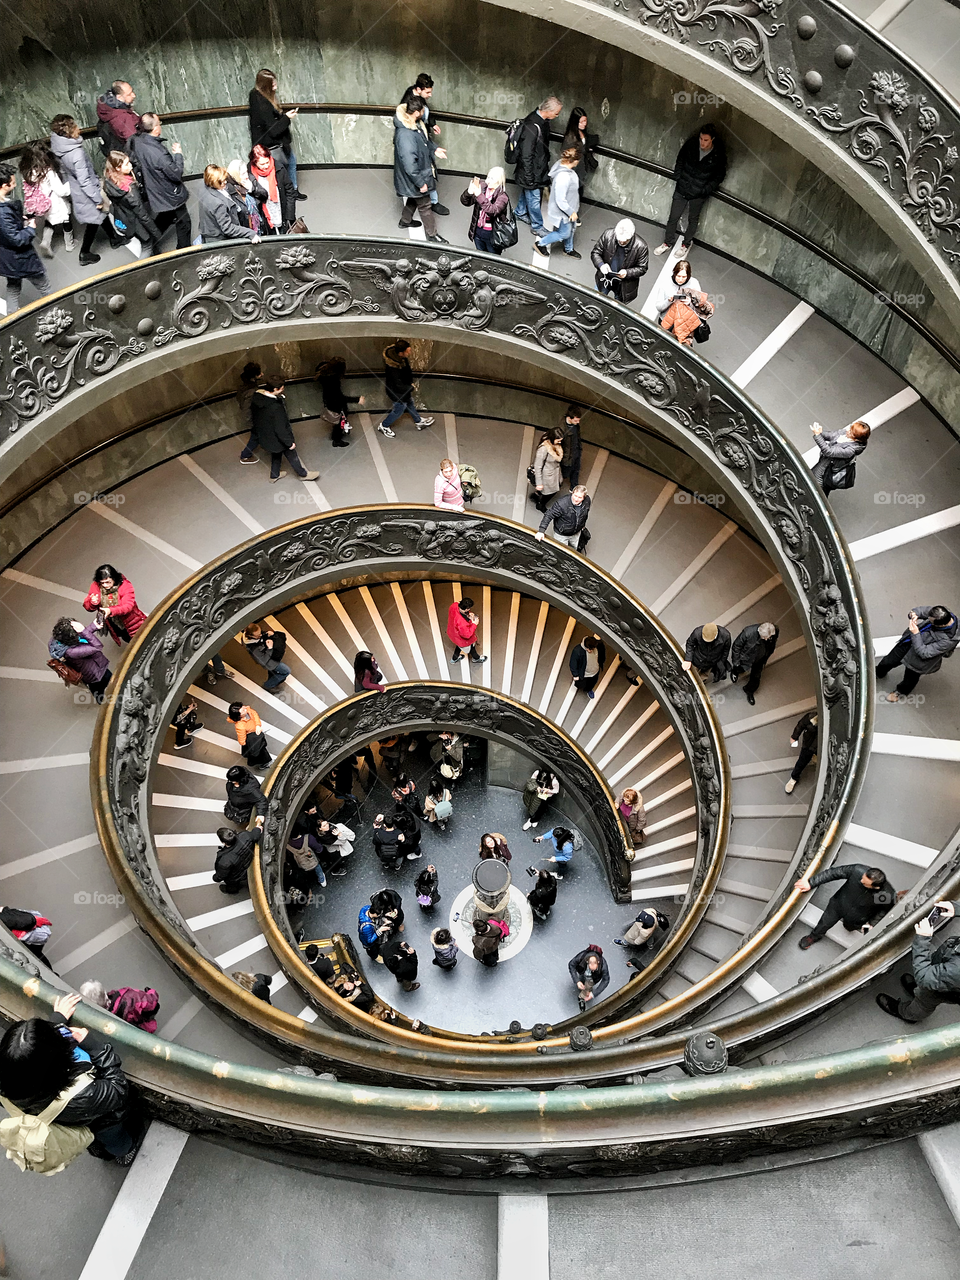 Stairs of the Vatican Museum in Rome, Italy.